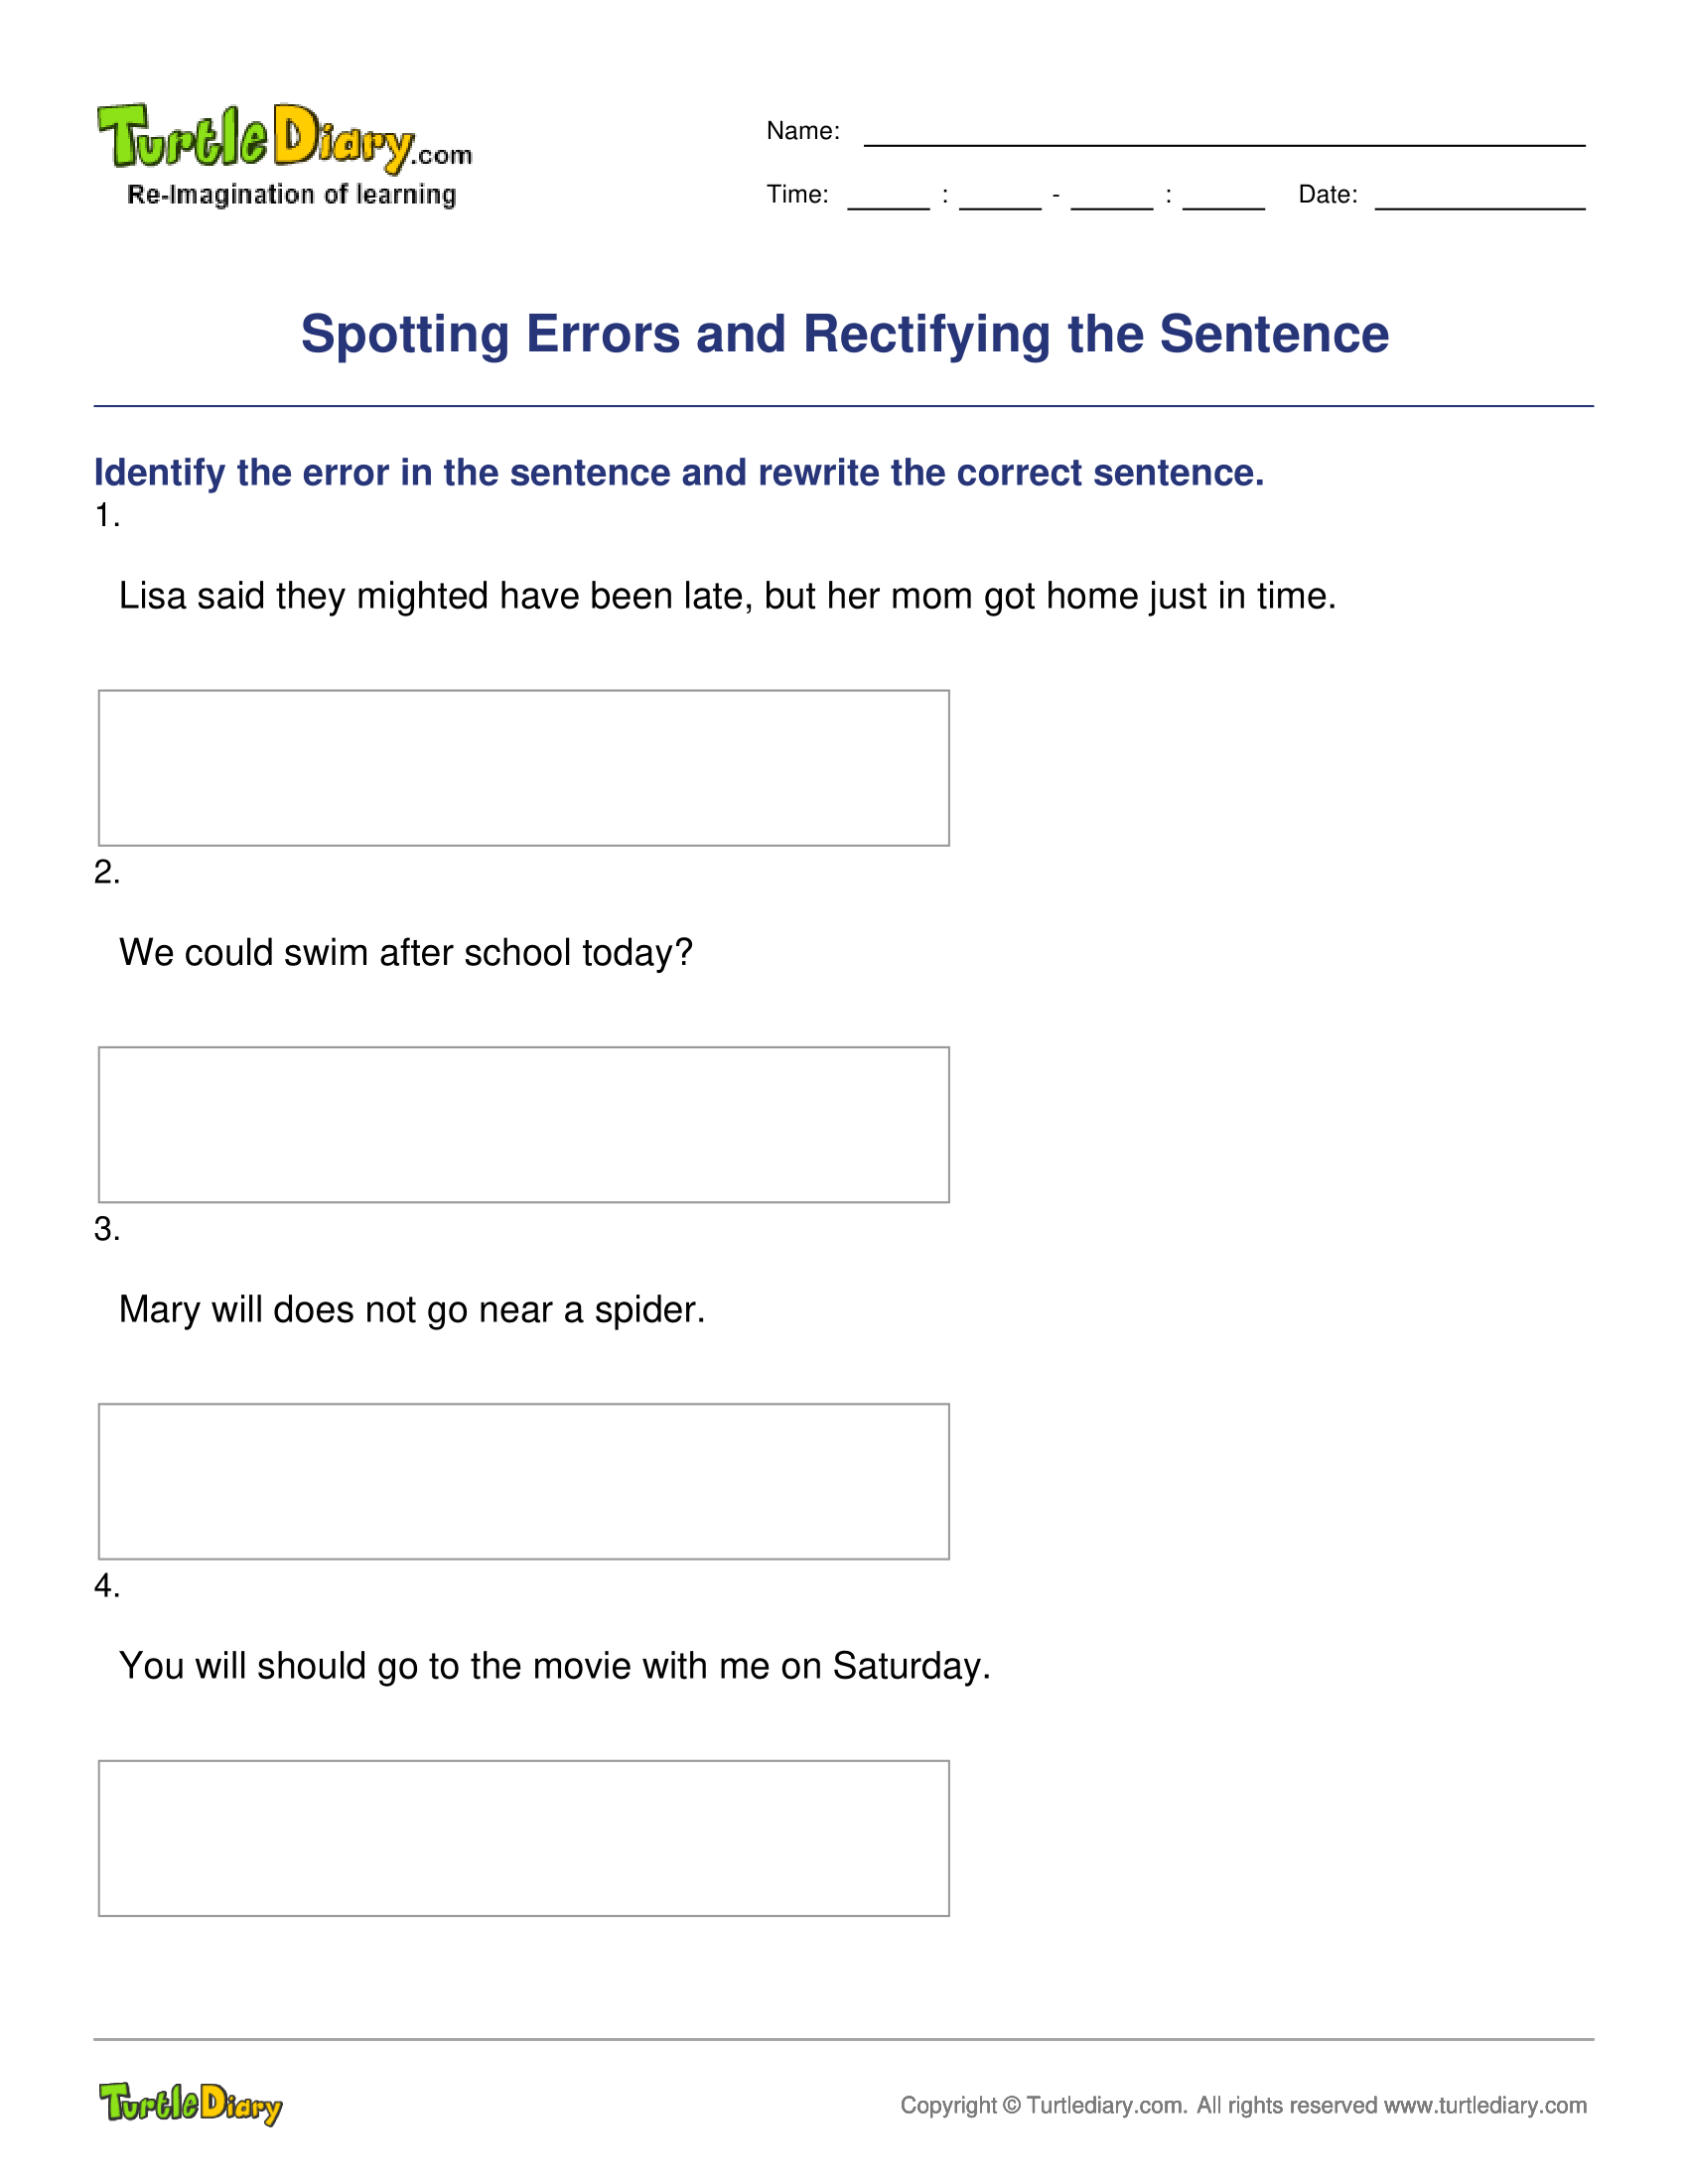 Spotting Errors and Rectifying the Sentence